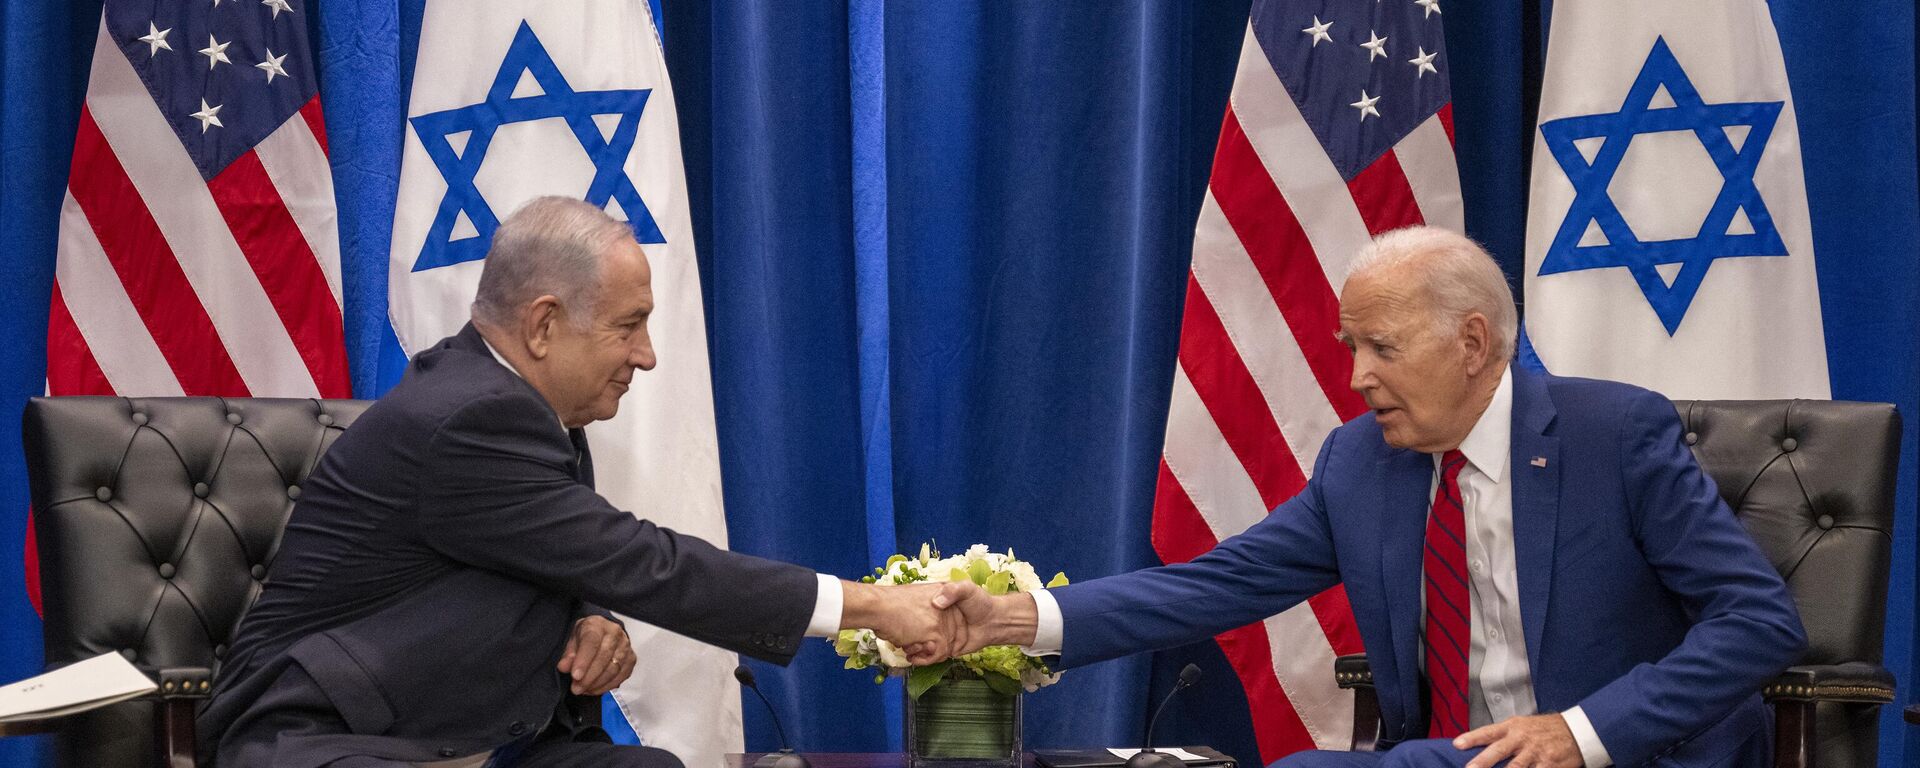 US President Joe Biden shakes hands with Israeli Prime Minister Benjamin Netanyahu as they meet on the sidelines of the 78th United Nations General Assembly in New York City on September 20, 2023.  - Sputnik International, 1920, 17.10.2023